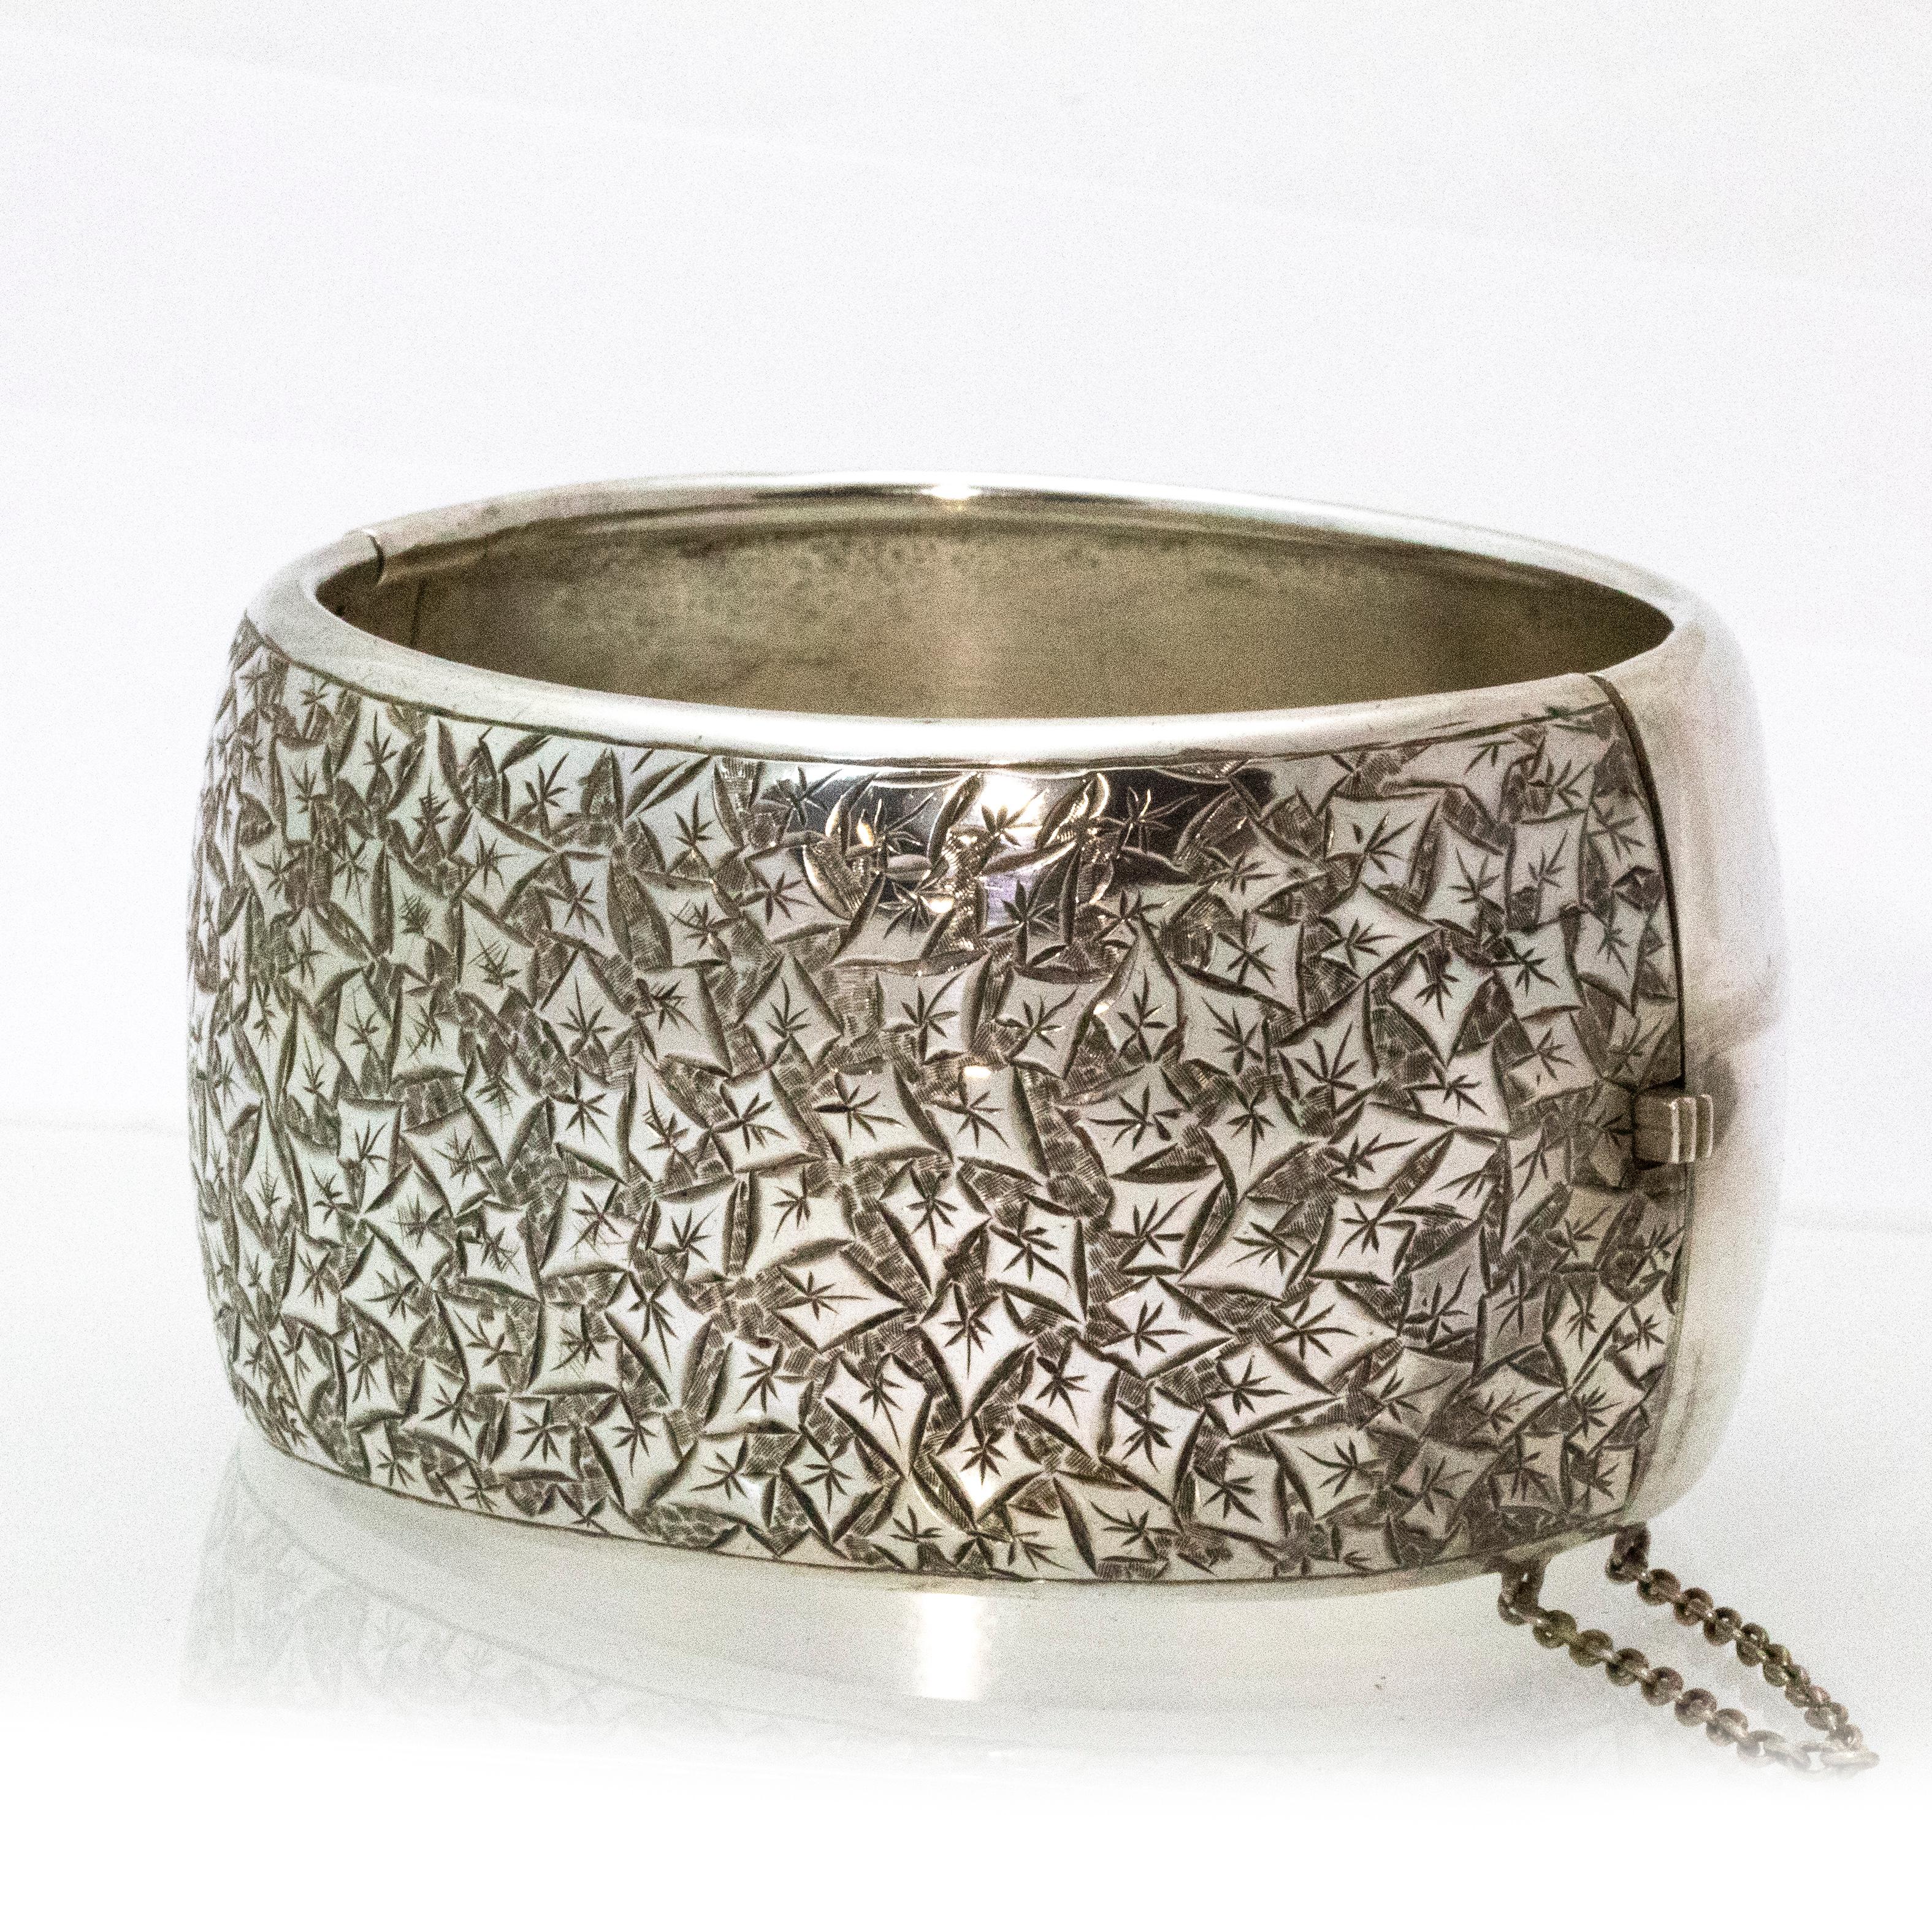 Finely detailed extra wide silver bangle. The engraving is beautifully intricate and really eye catching.